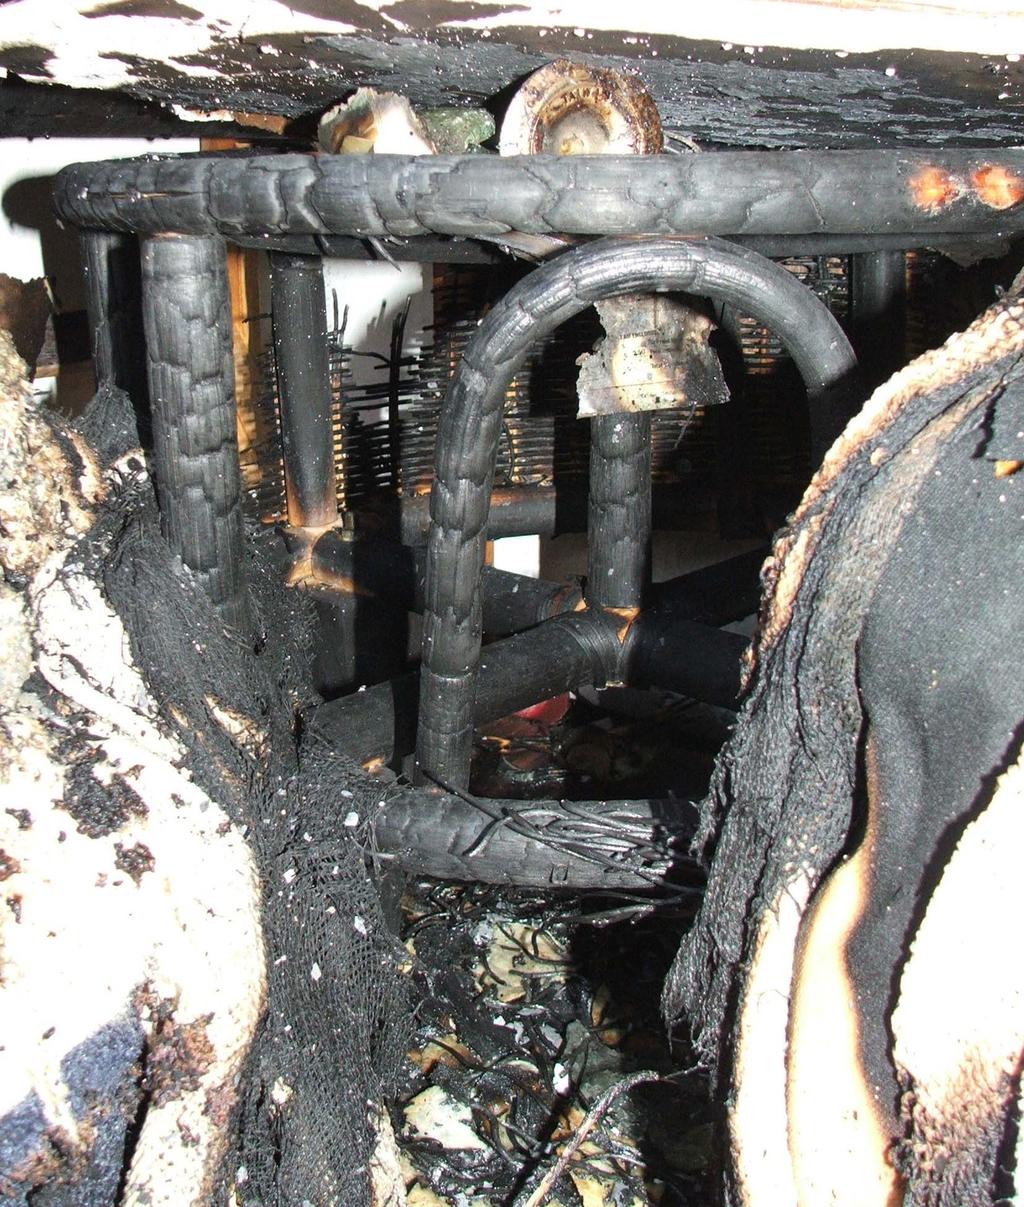 Area Ceiling badly burnt